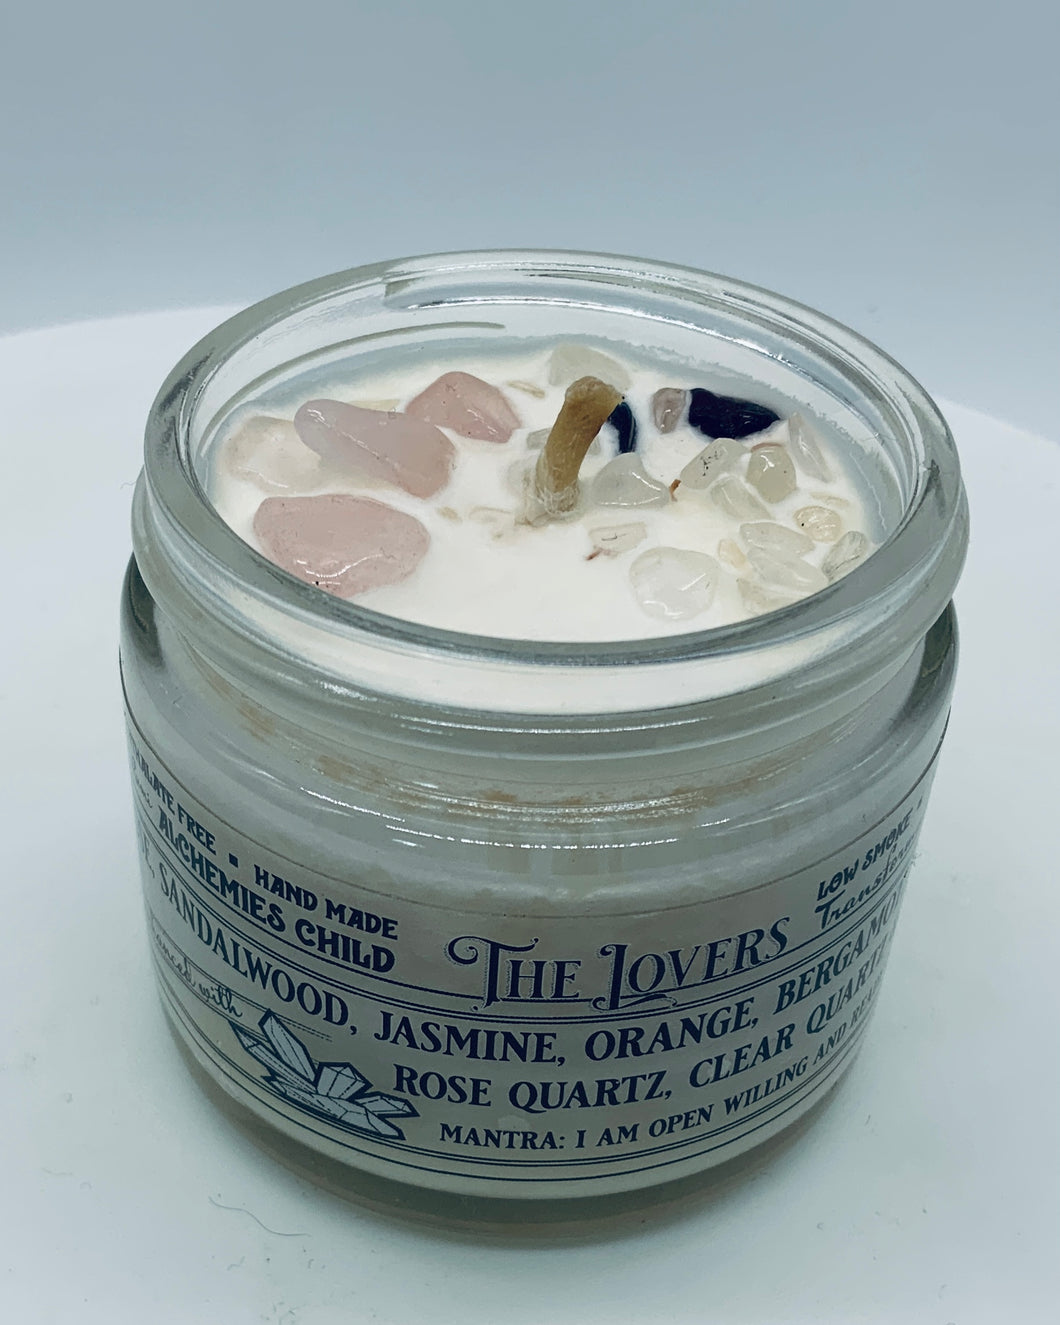 The Lovers Soy Candle